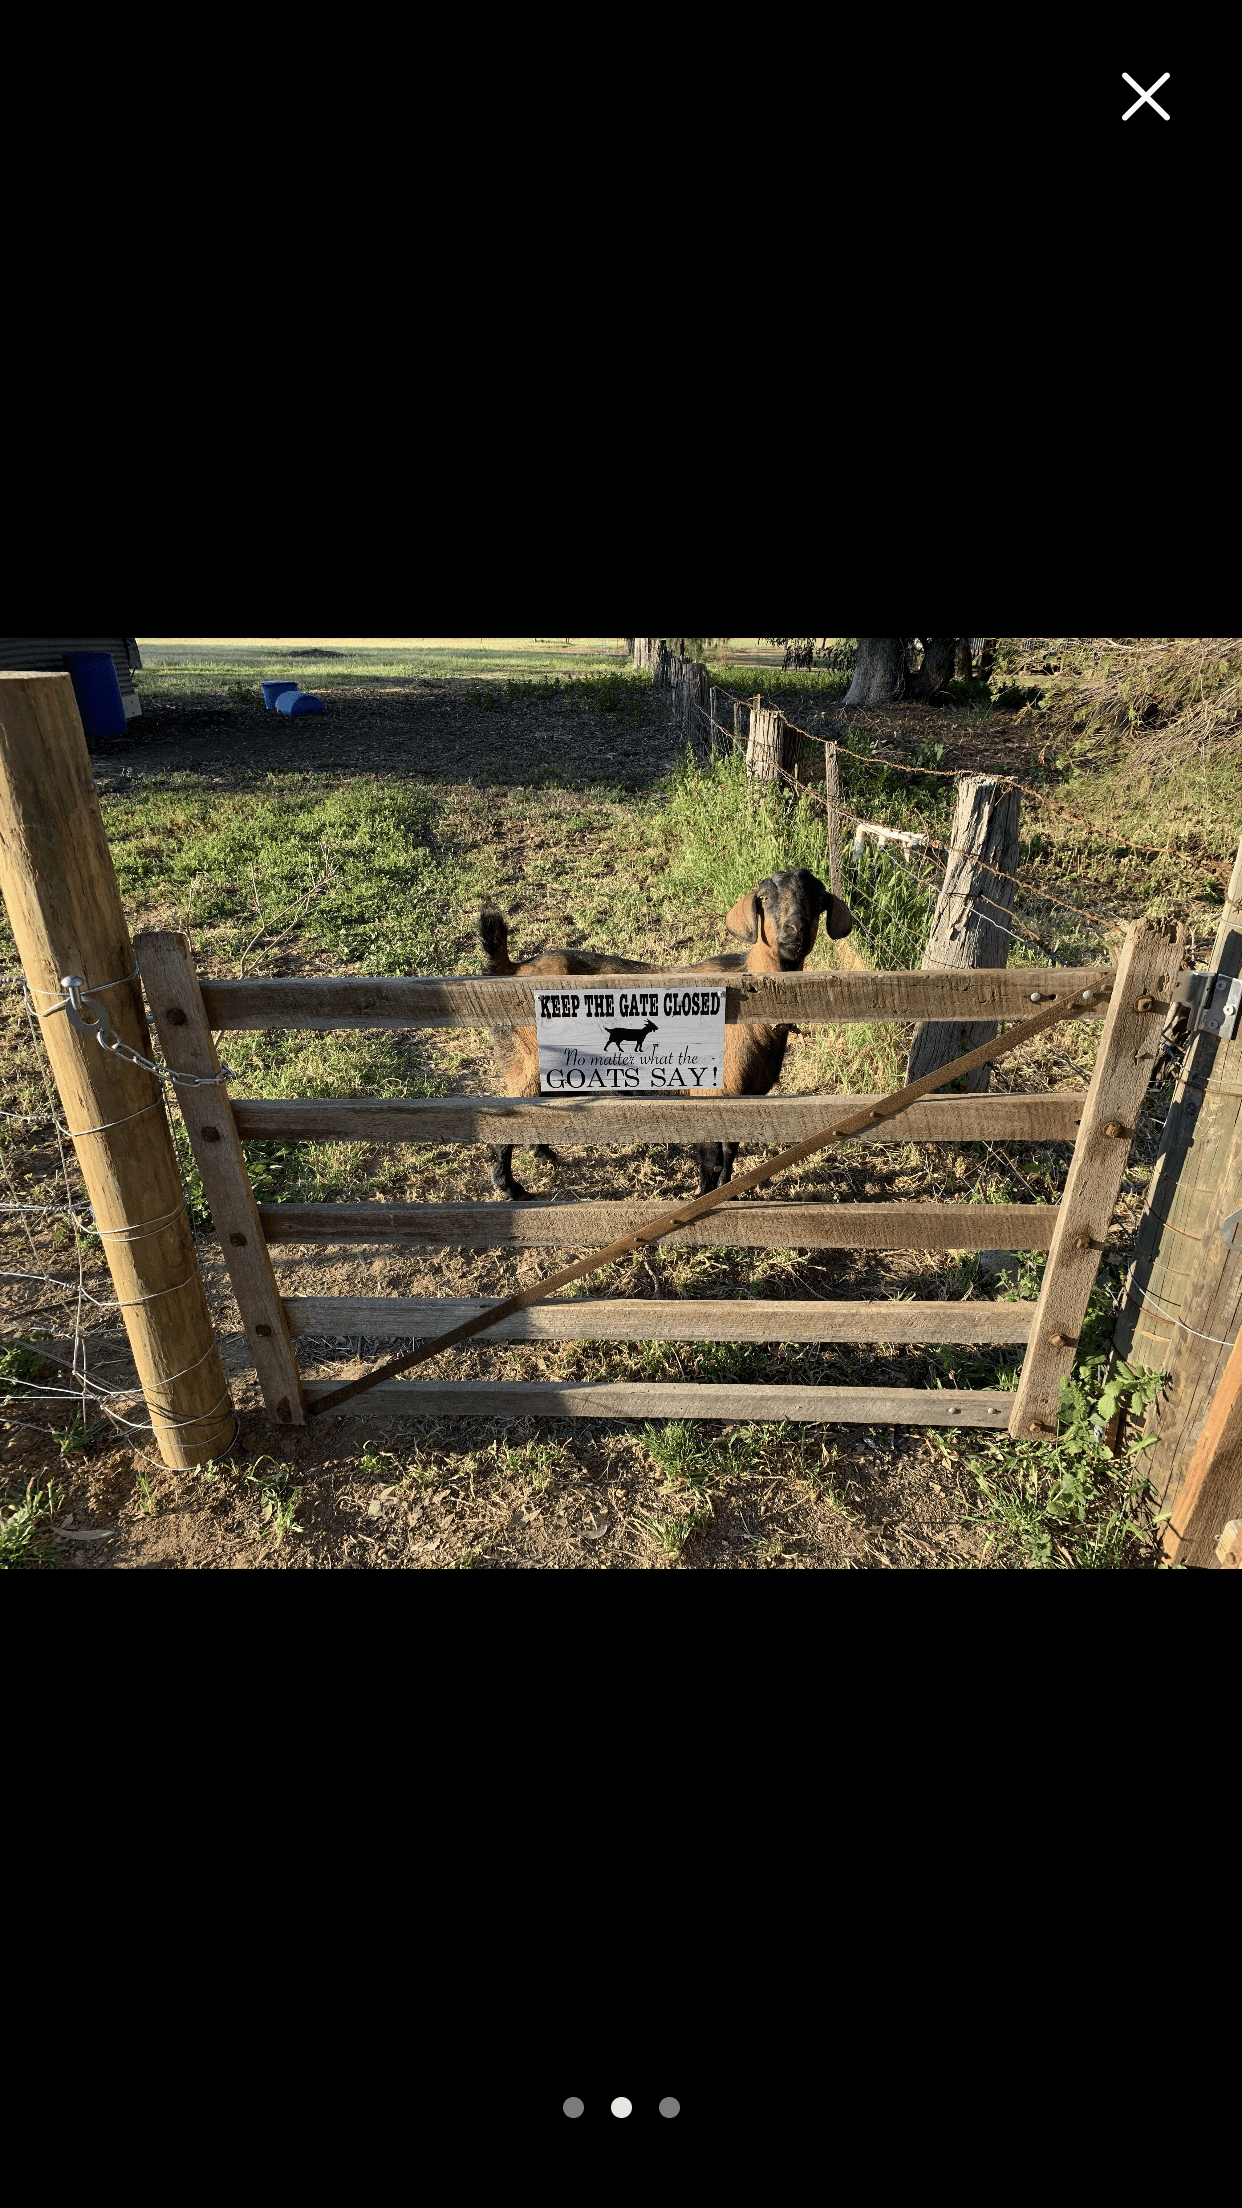 Keep The Gate Closed No Matter What The Goats Say Sign